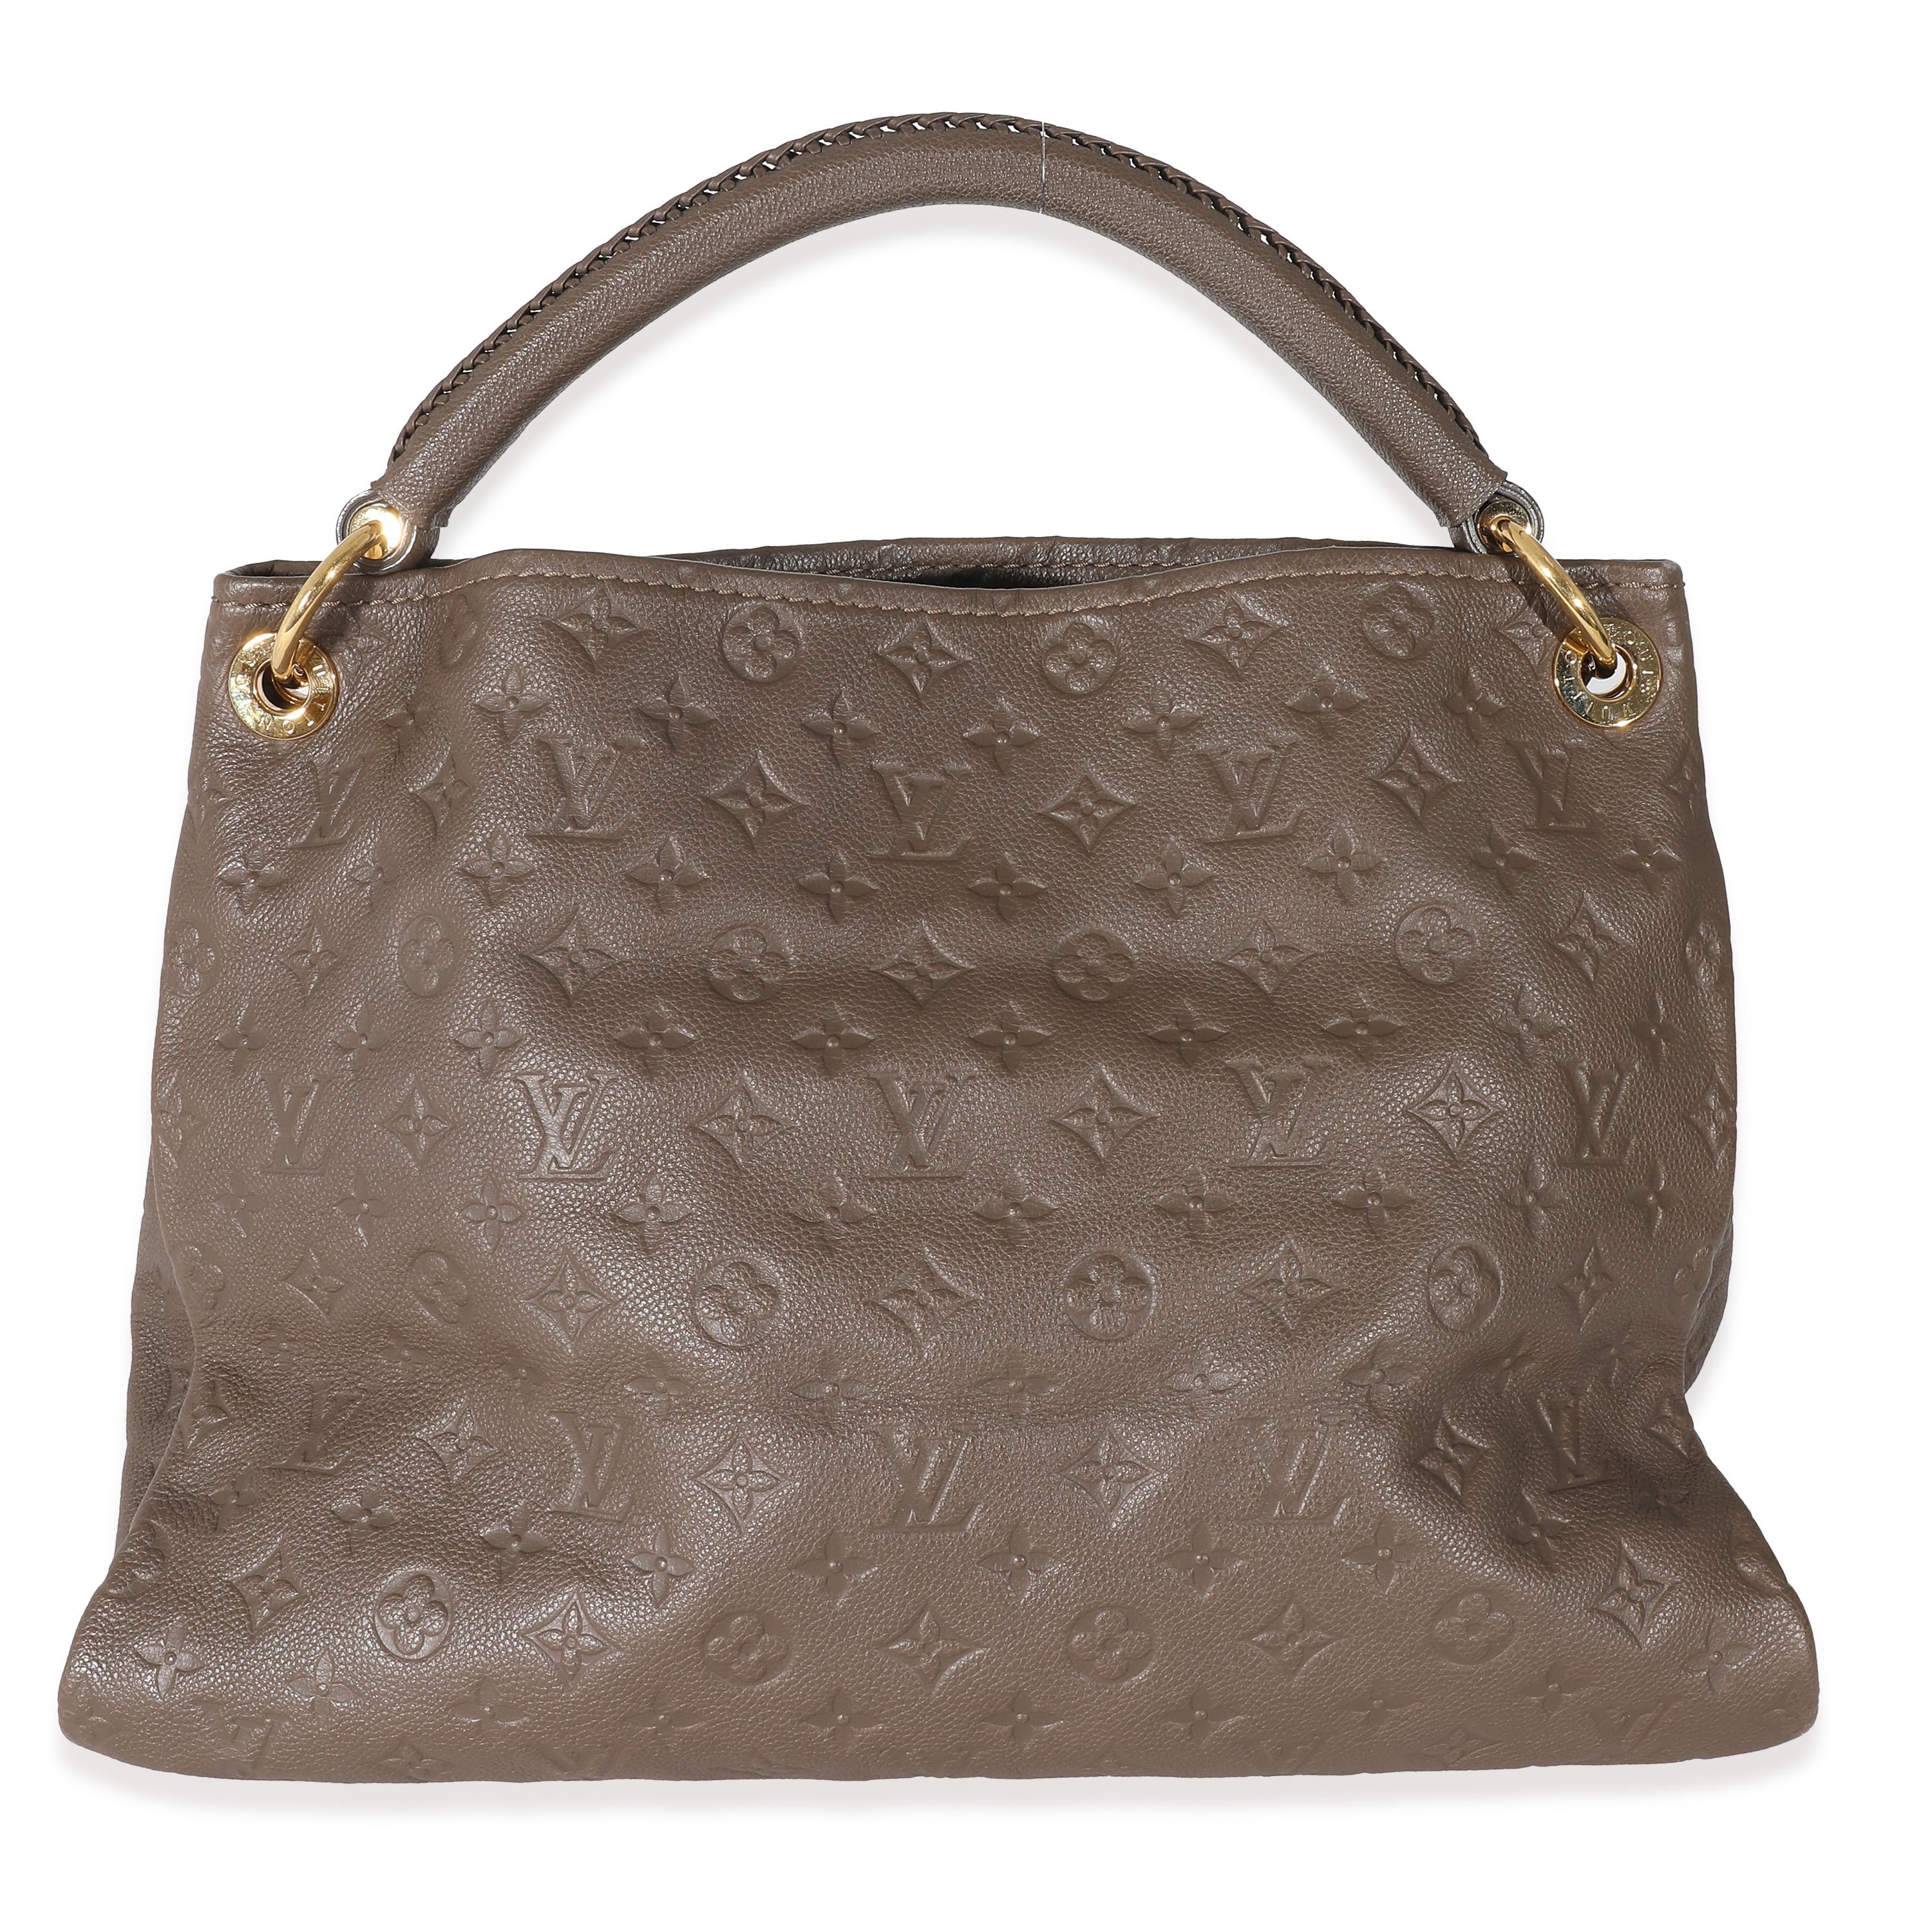 Listing Title: Louis Vuitton Ombre Monogram Empreinte Artsy MM
SKU: 133451
Condition: Pre-owned 
Handbag Condition: Very Good
Condition Comments: Item is in very good condition with minor signs of wear. Scuffing along corners and exterior leather.